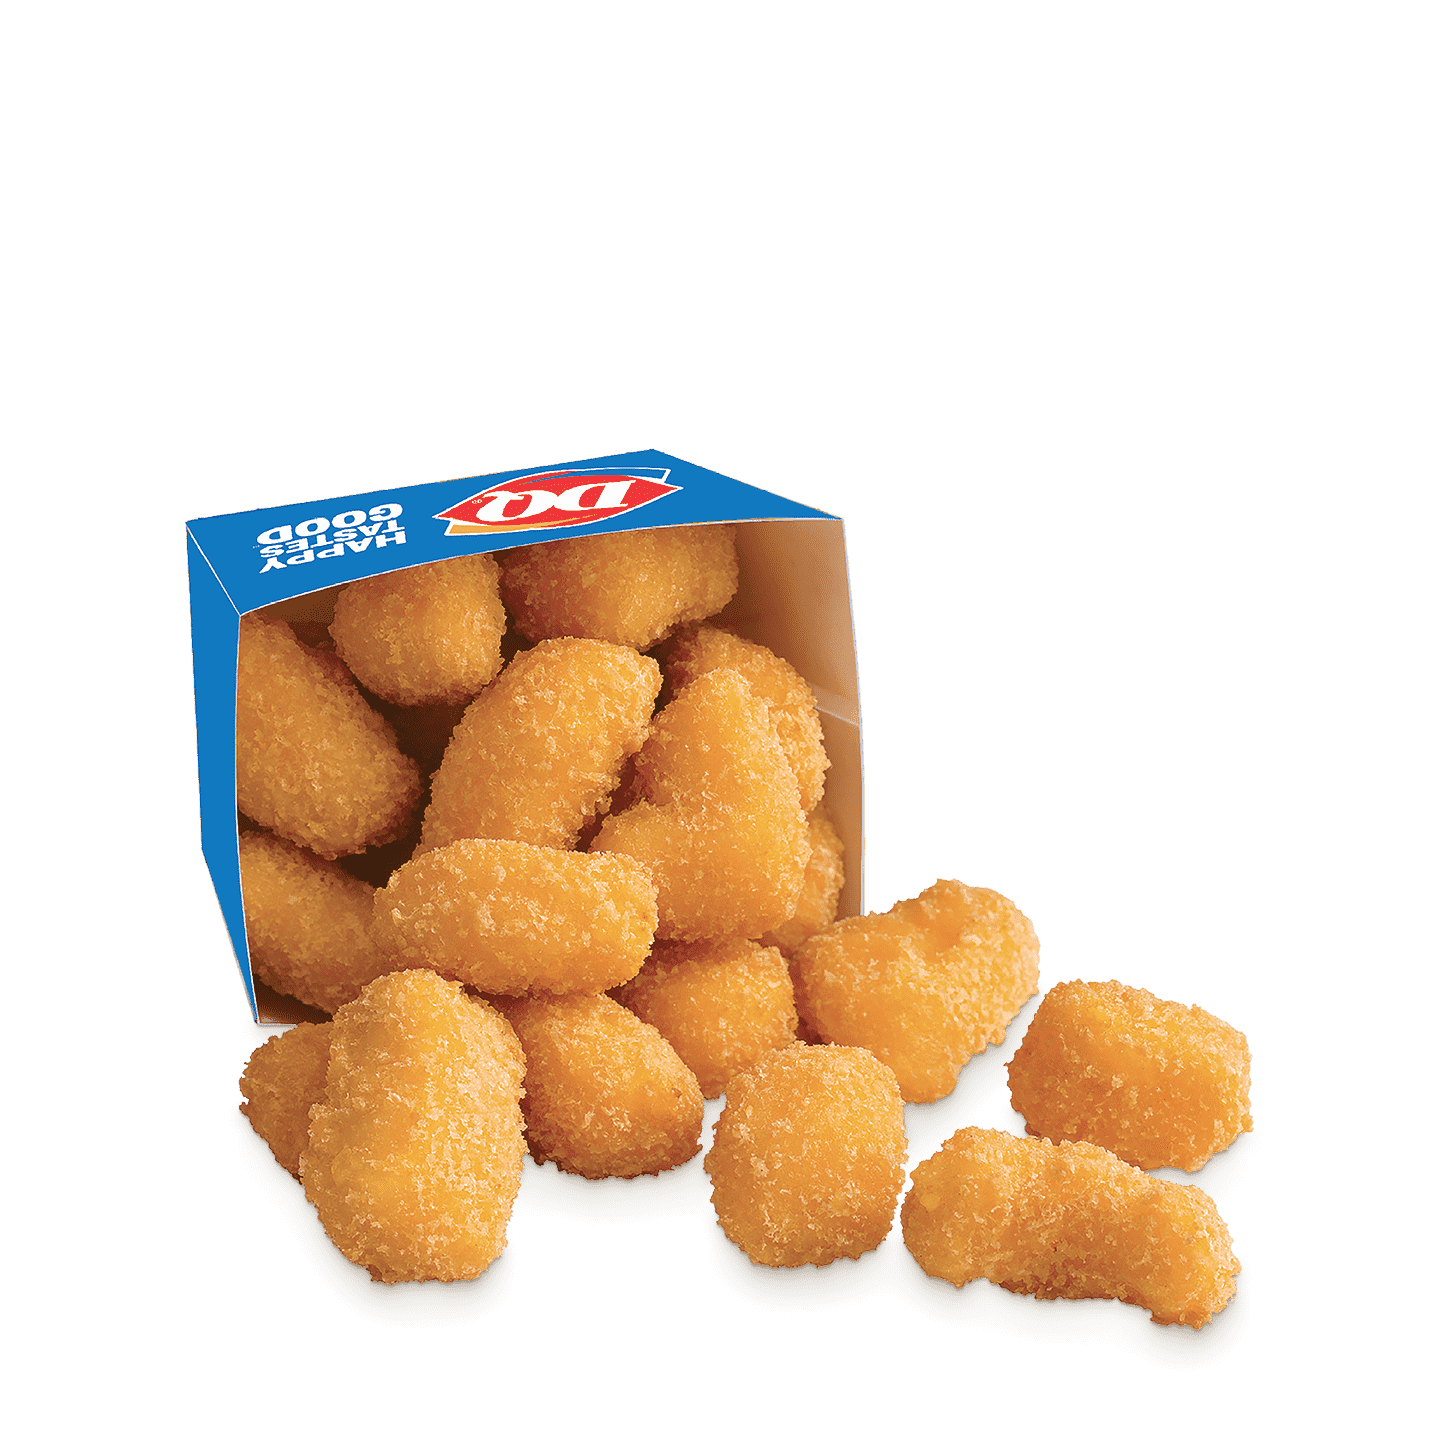 A box of deep-fried cheese curds.